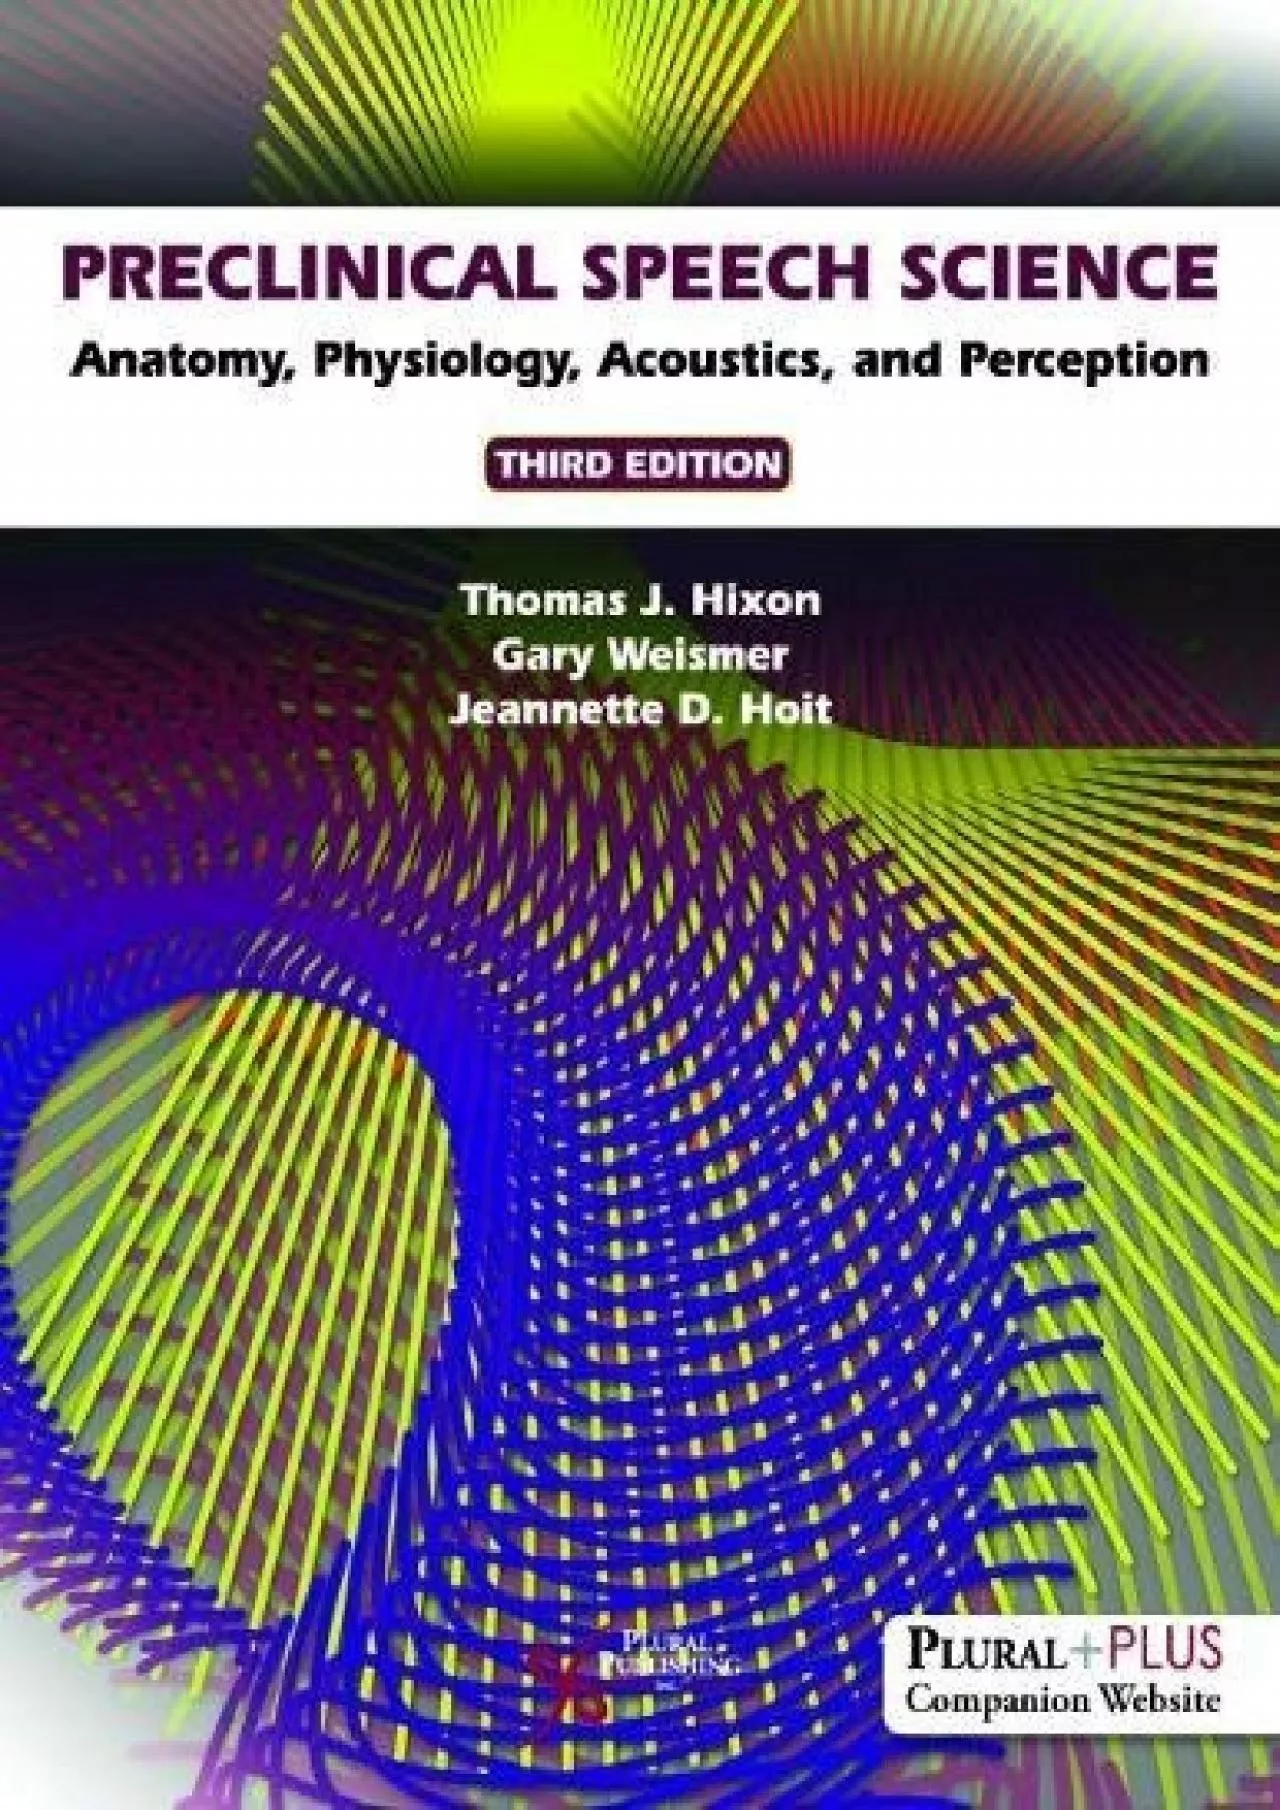 (DOWNLOAD)-Preclinical Speech Science: Anatomy, Physiology, Acoustics, and Perception,